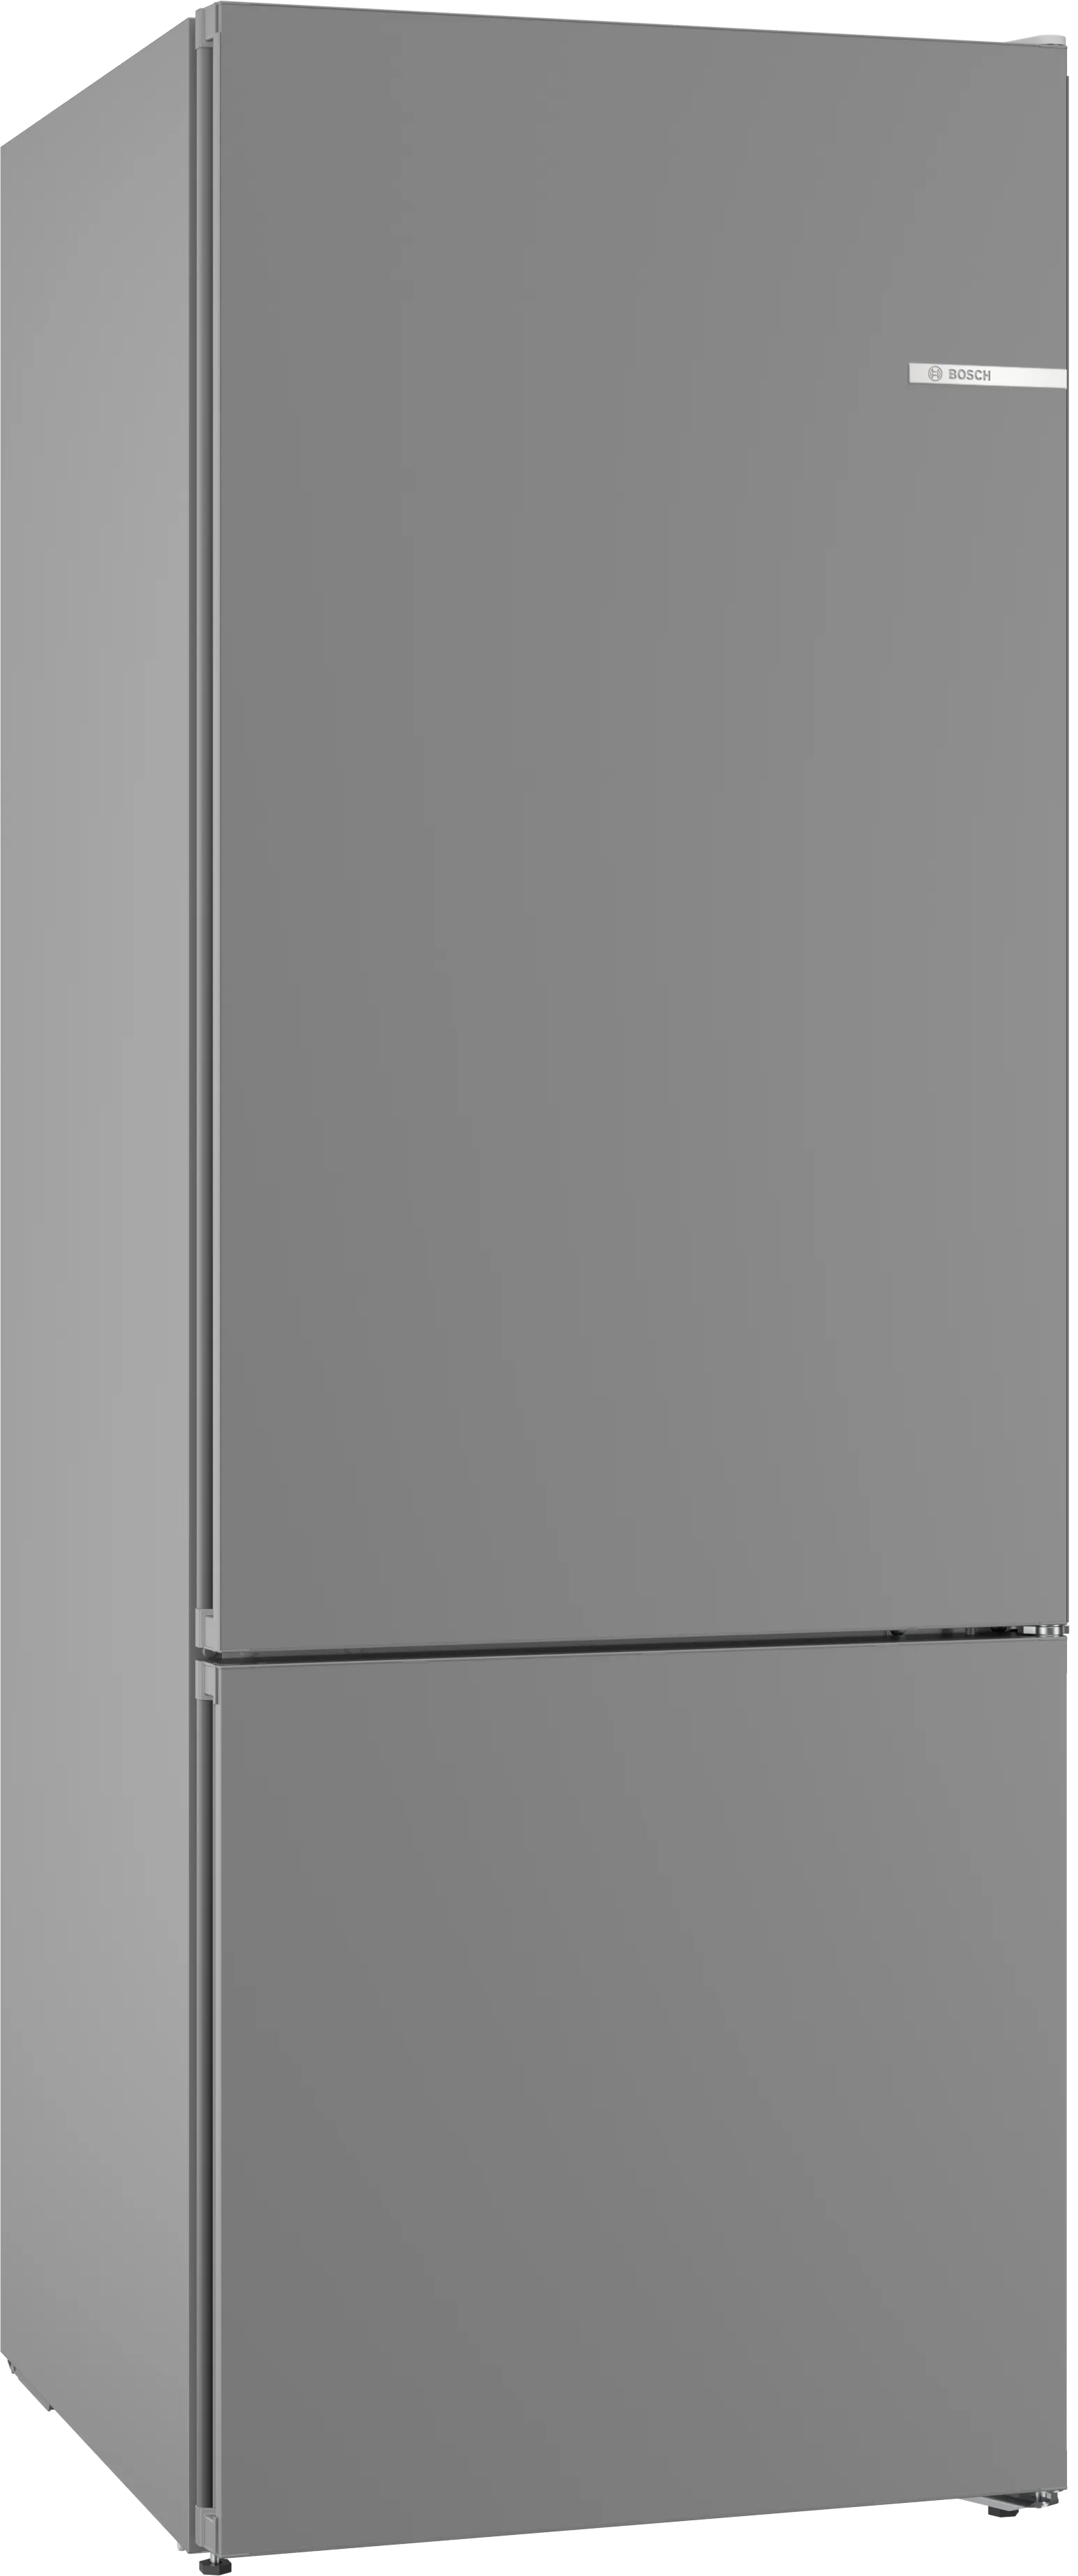 Series 6 Variostyle basic appliance without colored door 193 x 70 cm 